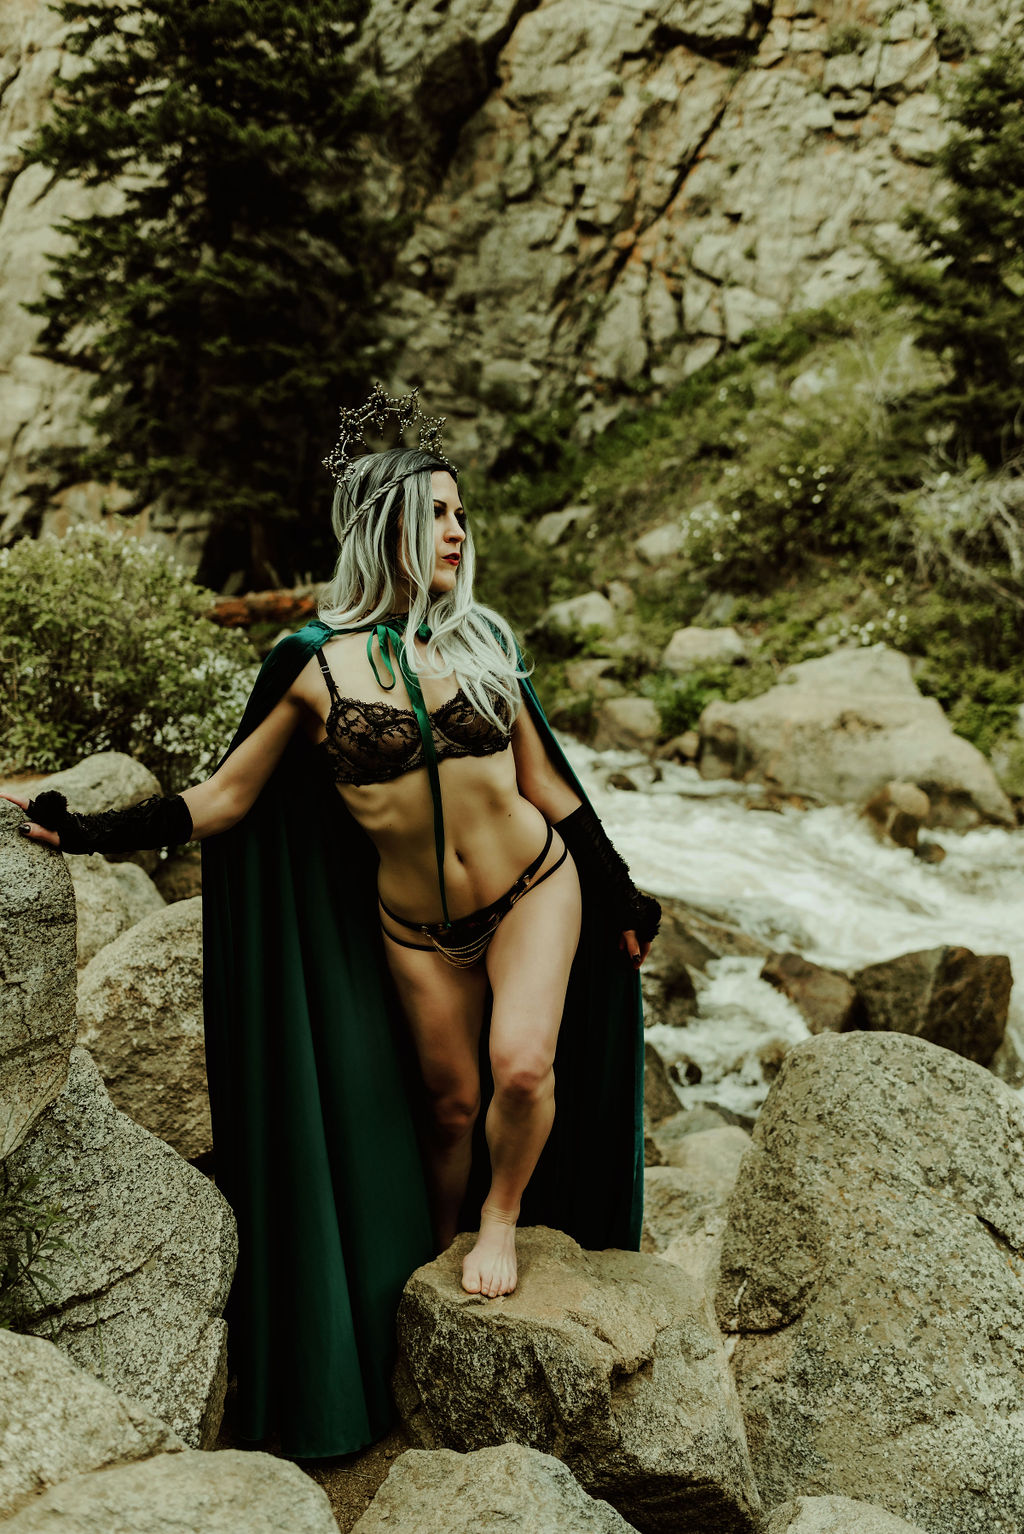 A white woman with silver and black hair poses in front of a waterfall wearing black lingerie, a dark green cape and a goth headpiece for a boudoir photo by Kendra Colleen Photography